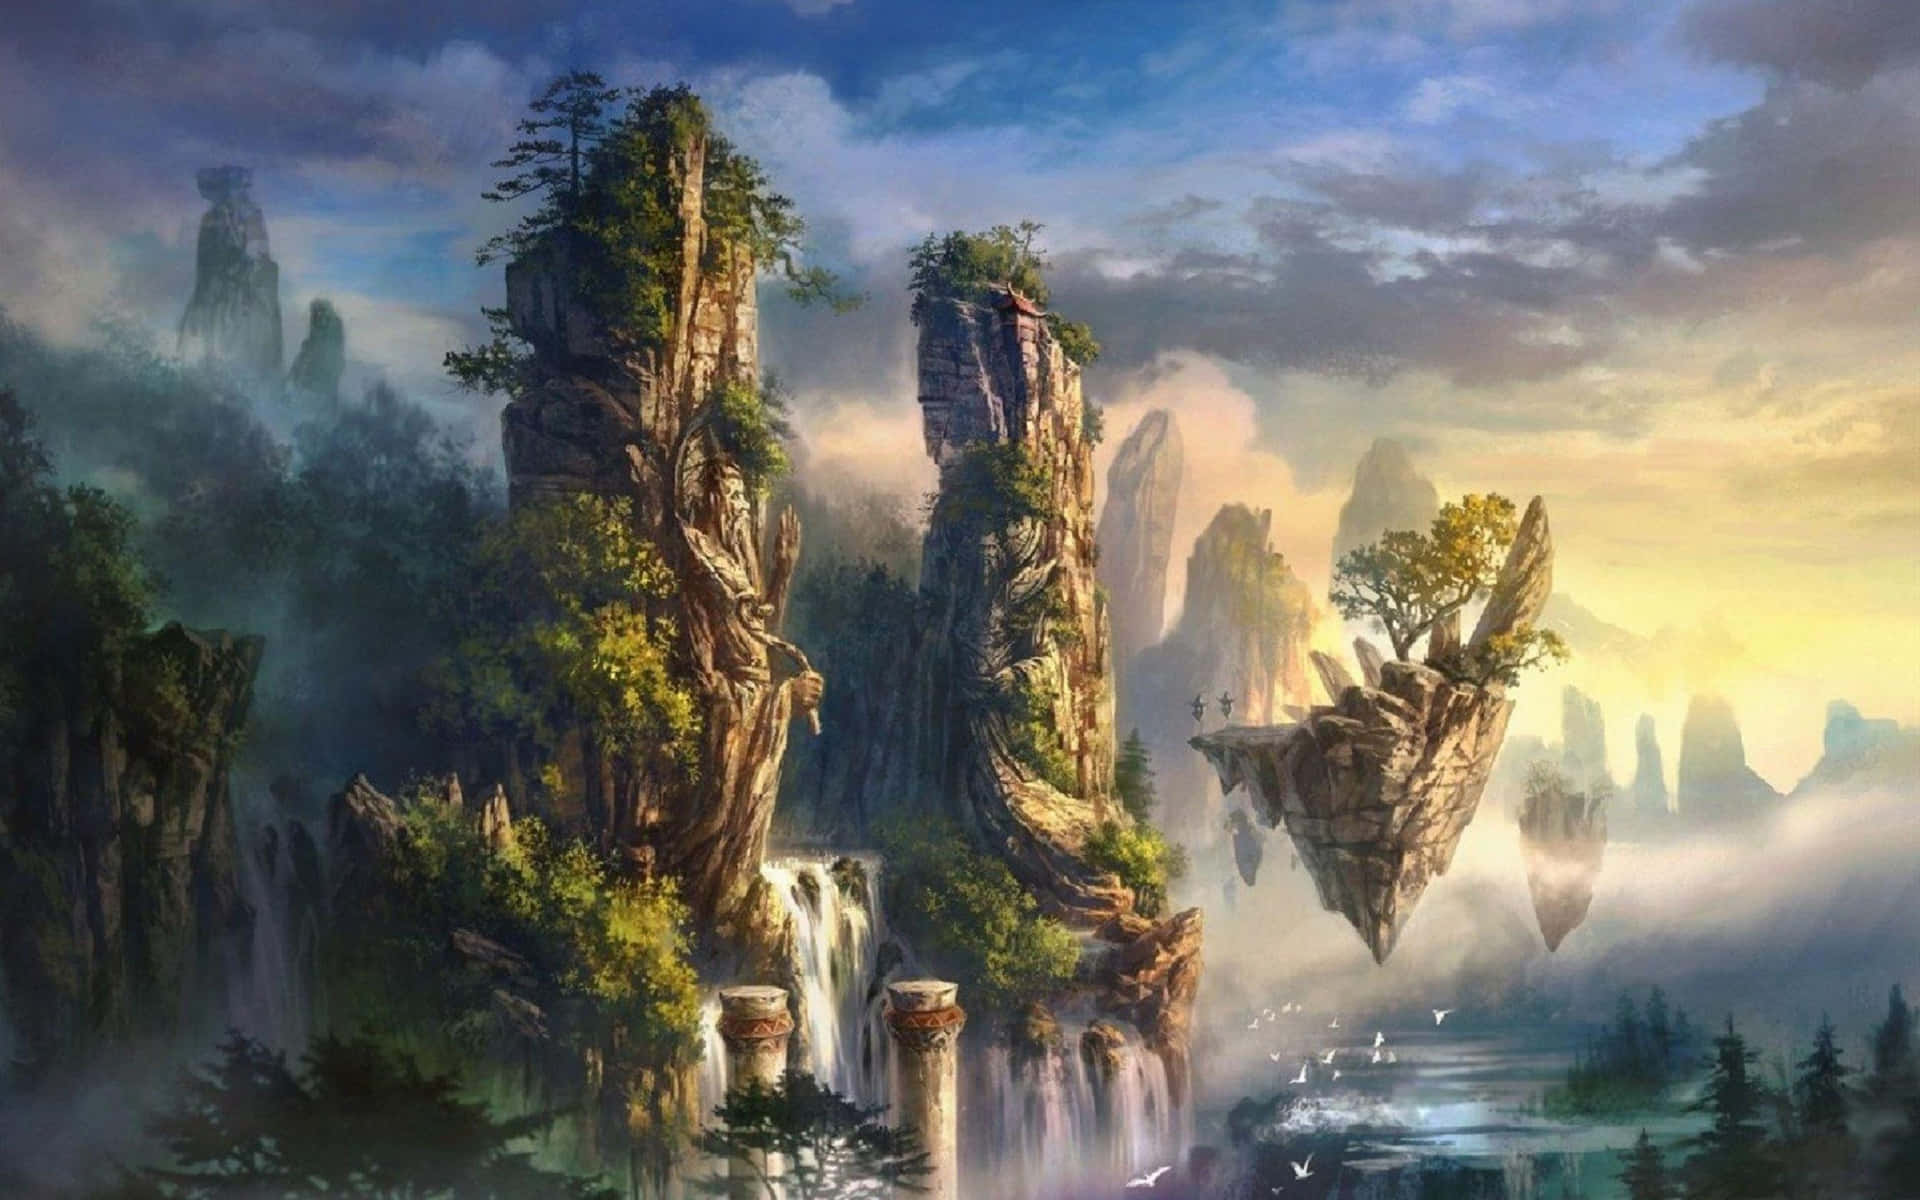 Enchanting 3D Fantasy World with Majestic Castle and Magical Creatures Wallpaper